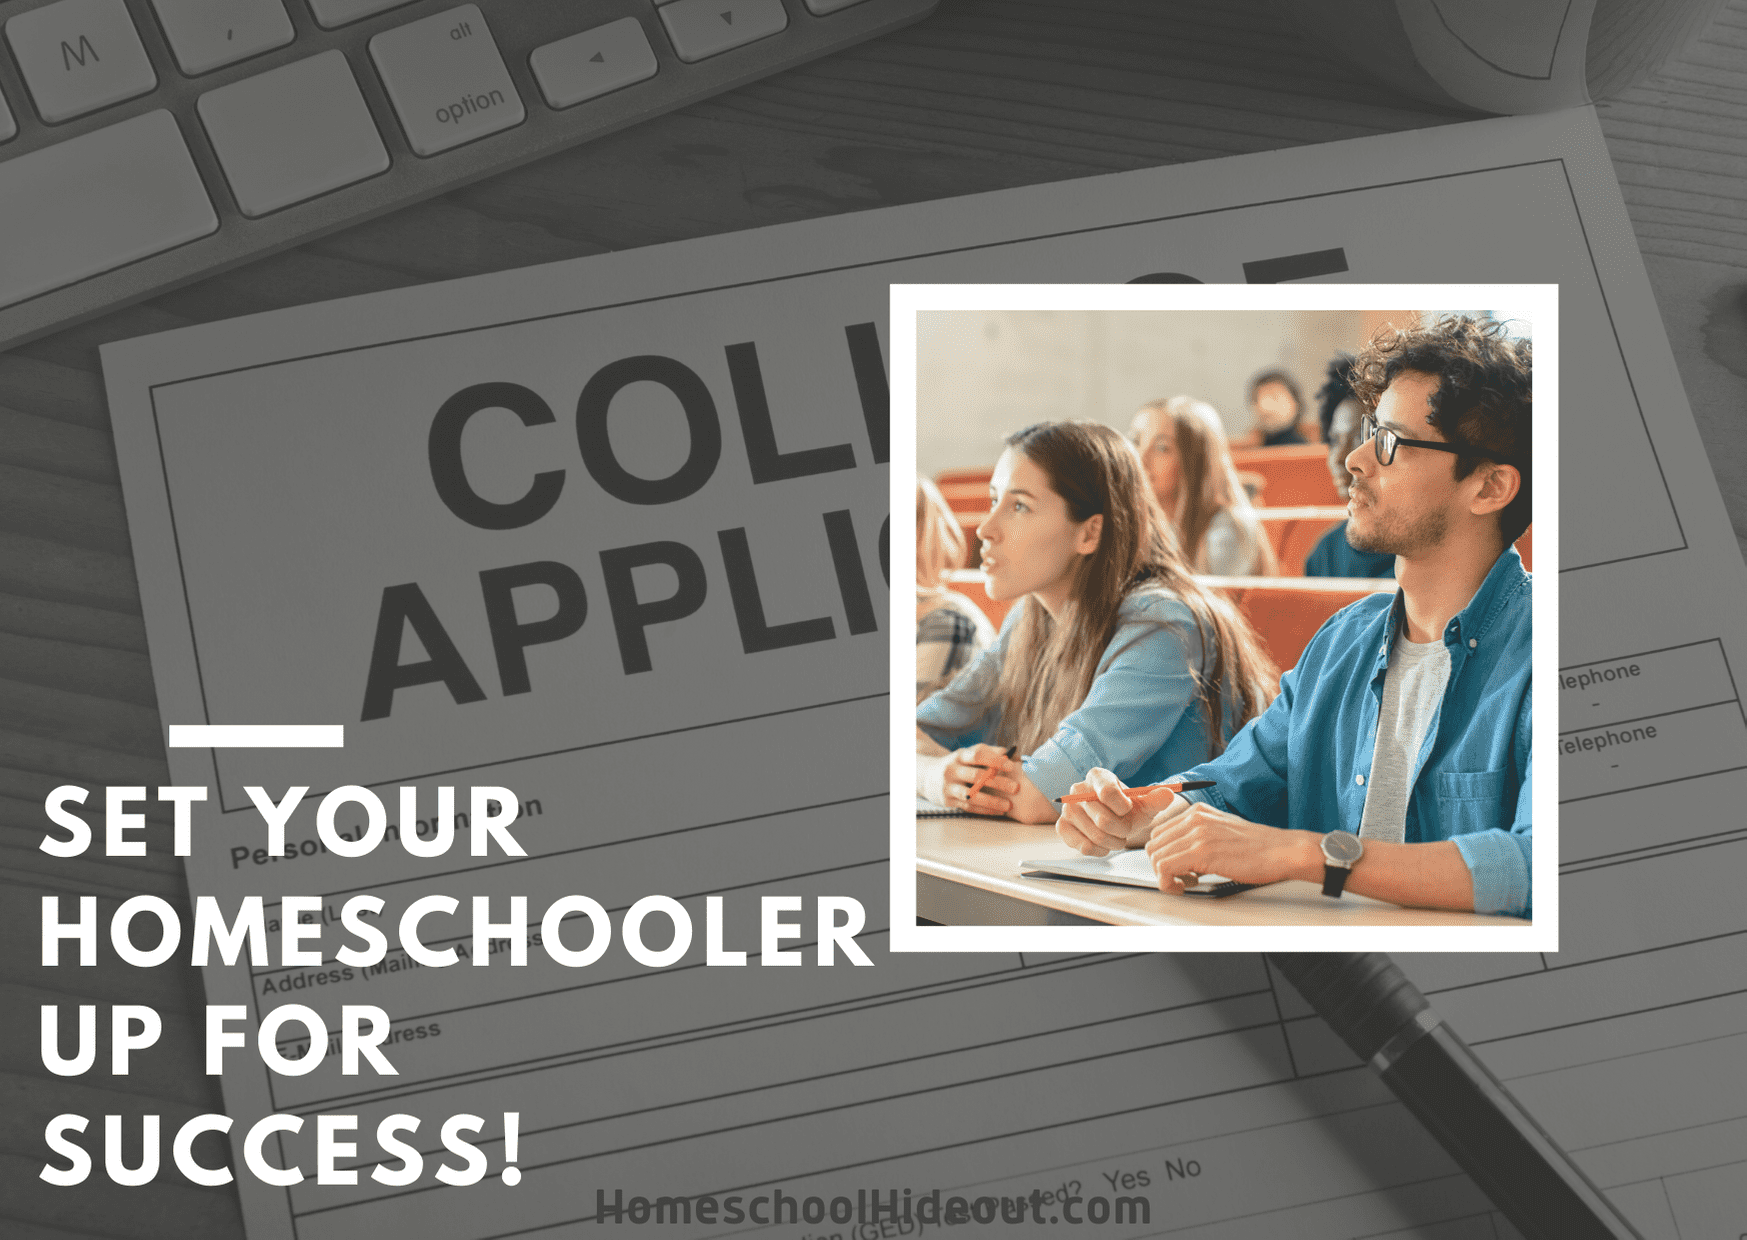 Love these tips to help prepare your homeschooler for college! #6 is my favorite!